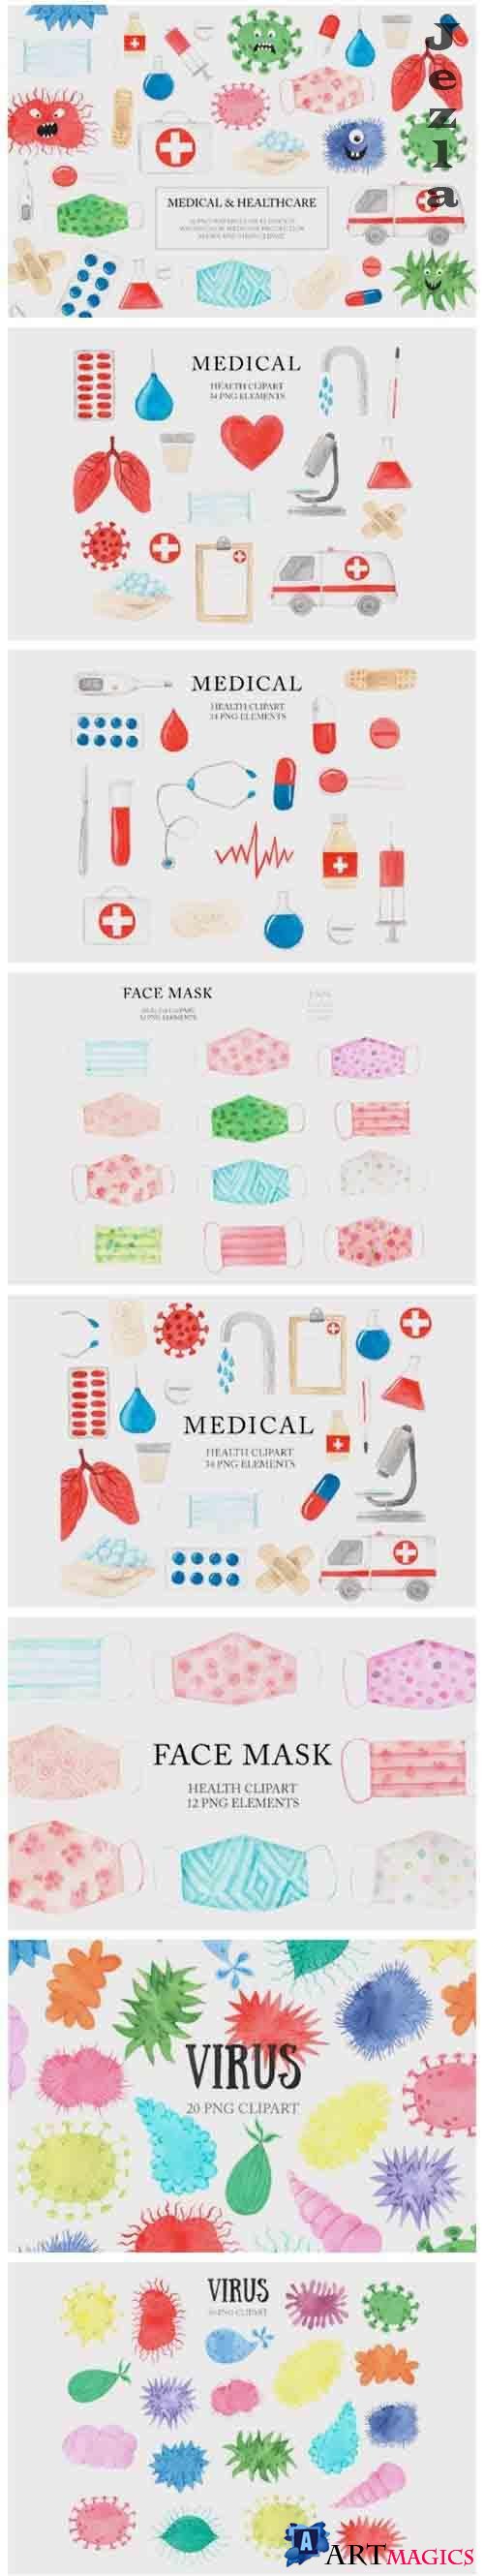 Medical Healthcare Clipart - 4943190